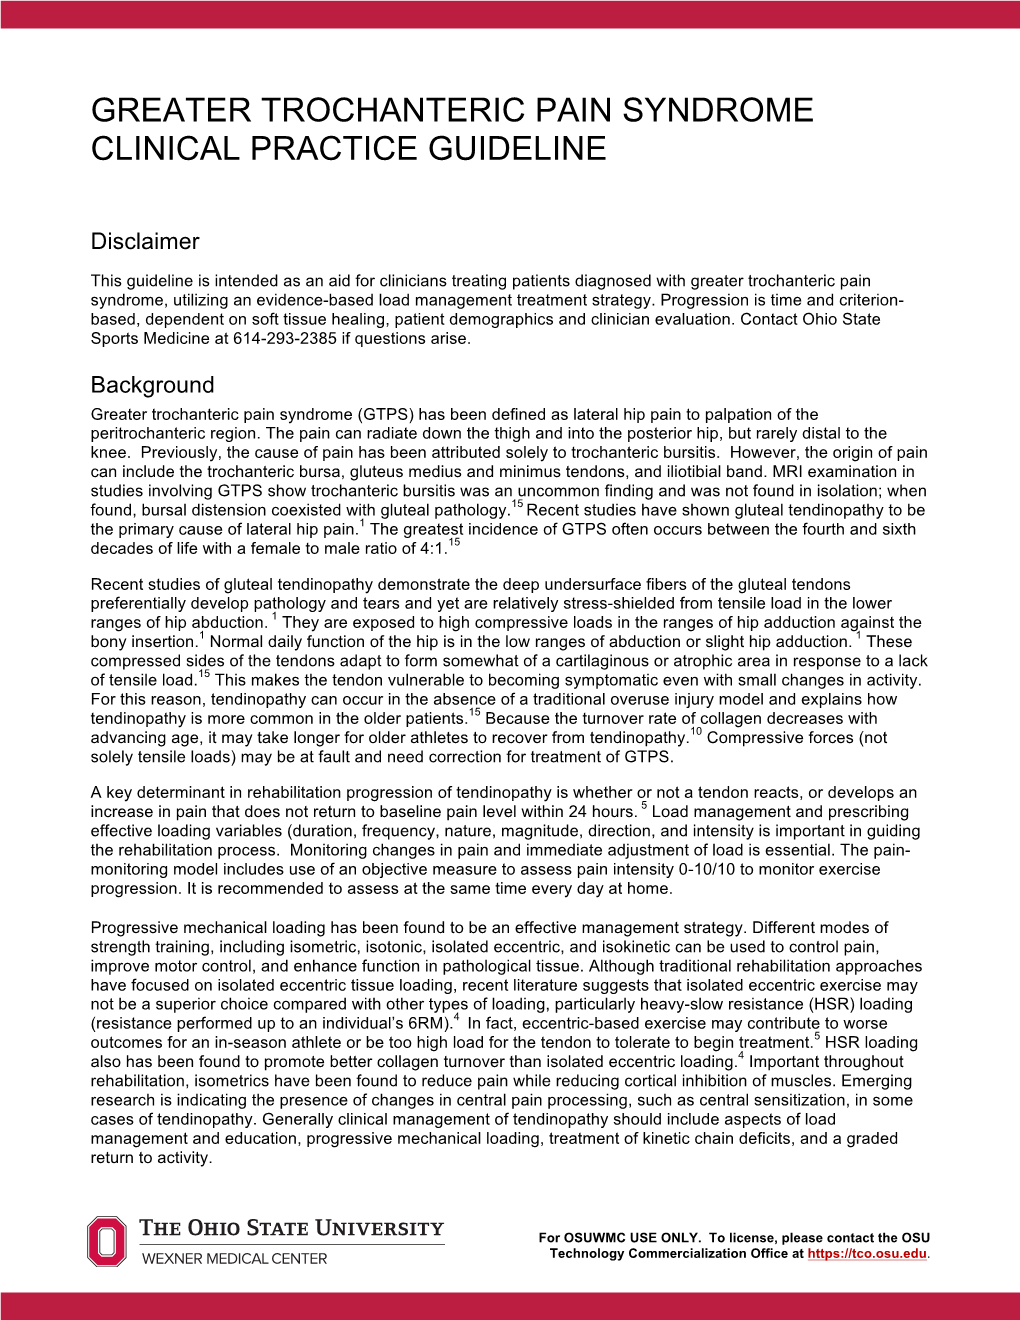 Greater Trochanteric Pain Syndrome Clinical Practice Guideline